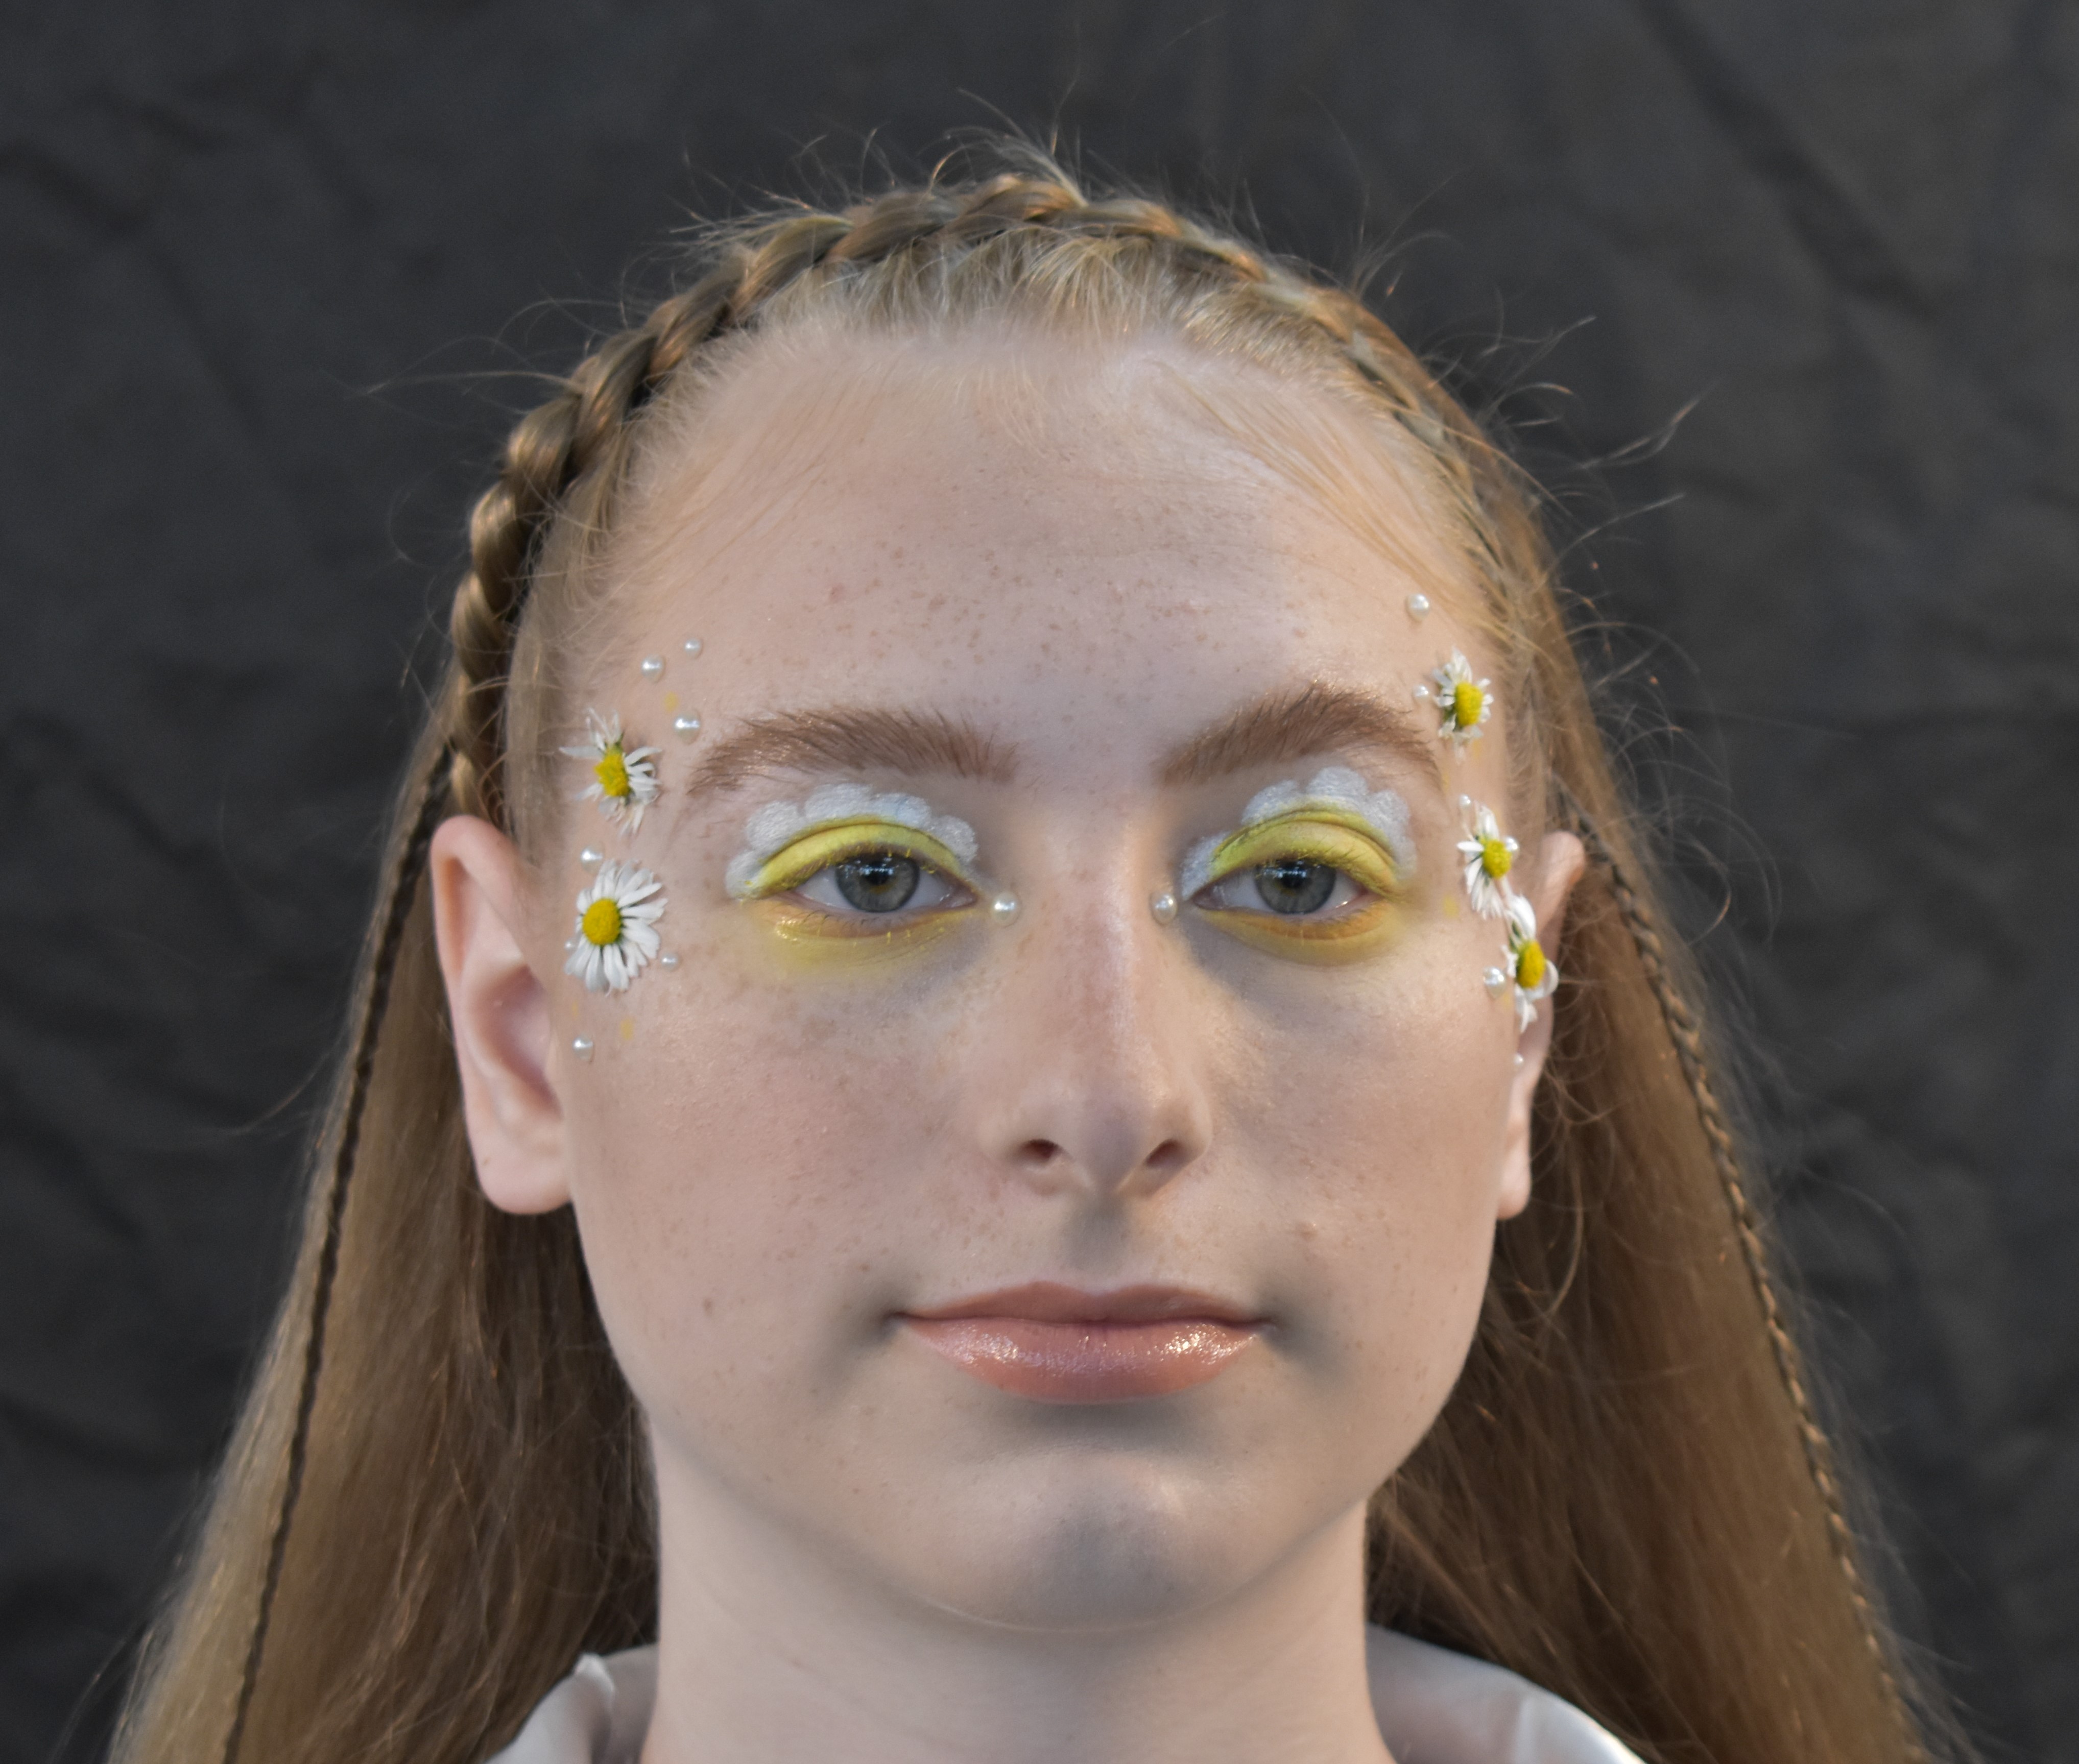 Close up facial picture of female with yellow and white flowery eye makeup, daisies attached to her temples and with small braid across the top of her head.